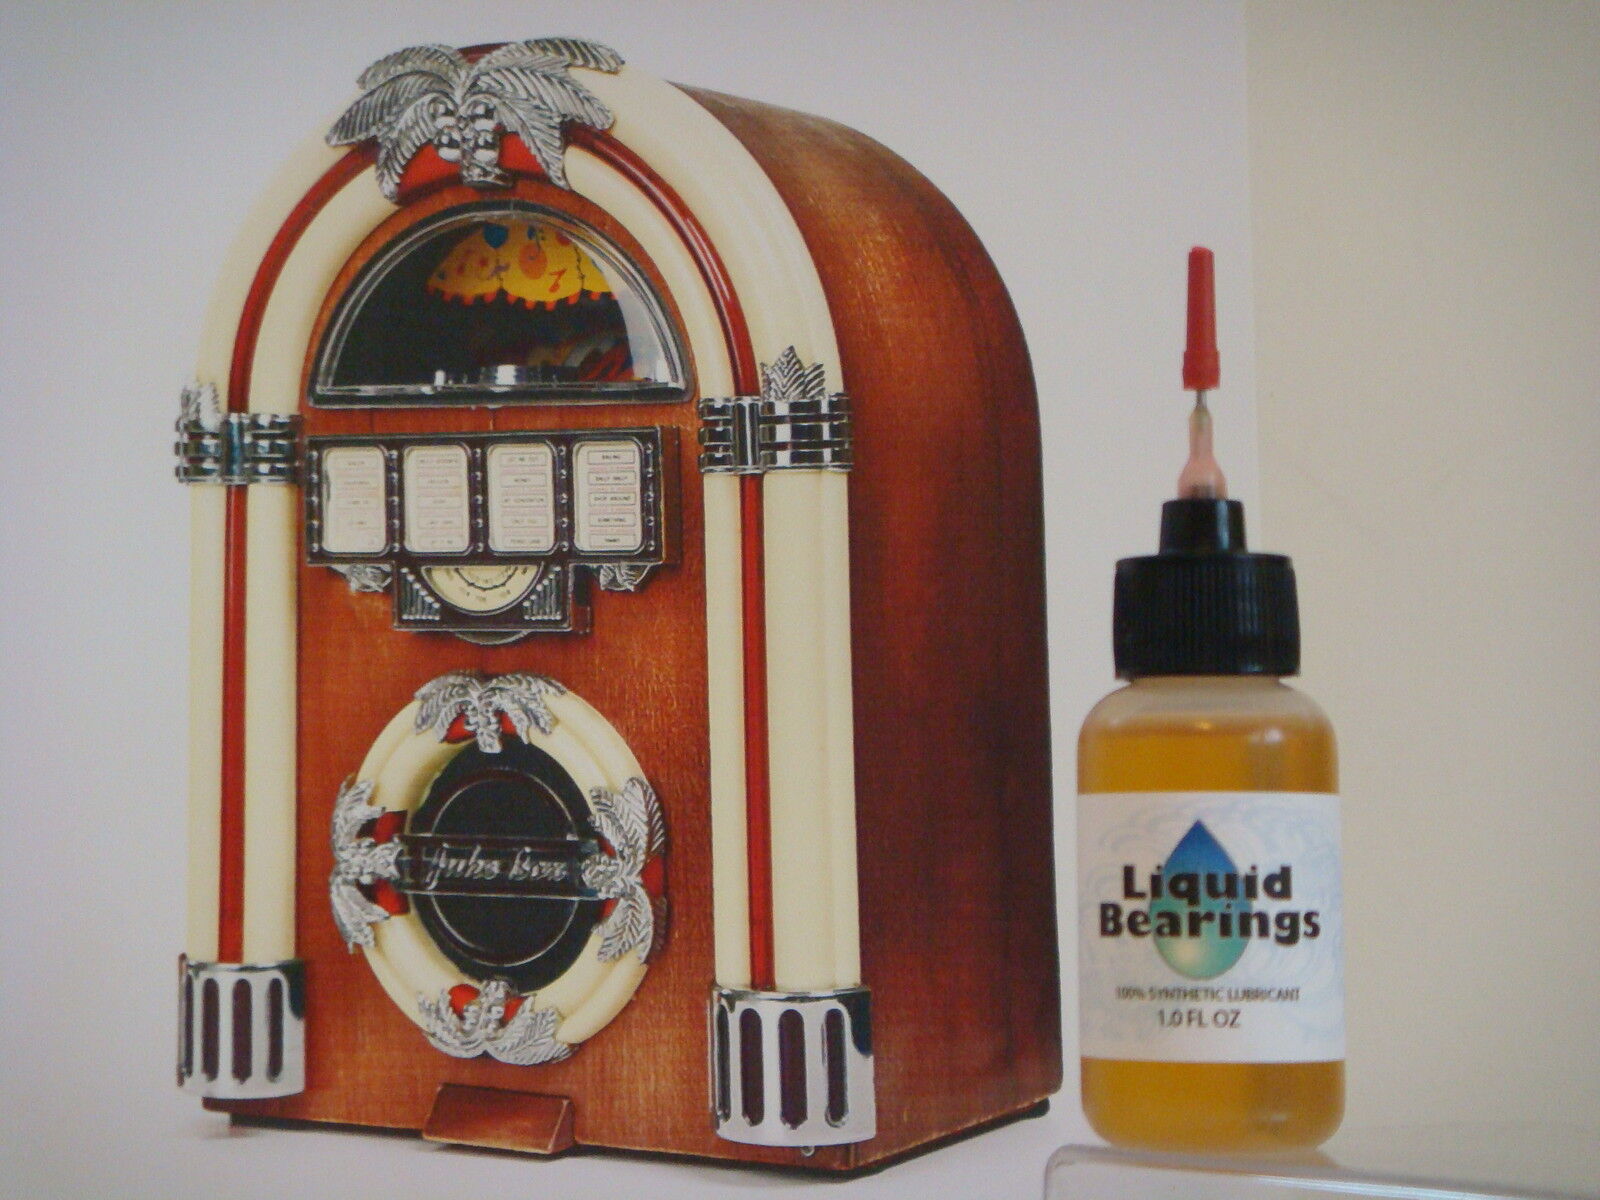 Liquid Bearings, BEST 100%-synthetic oil for Seeburg jukeboxes, READ THIS